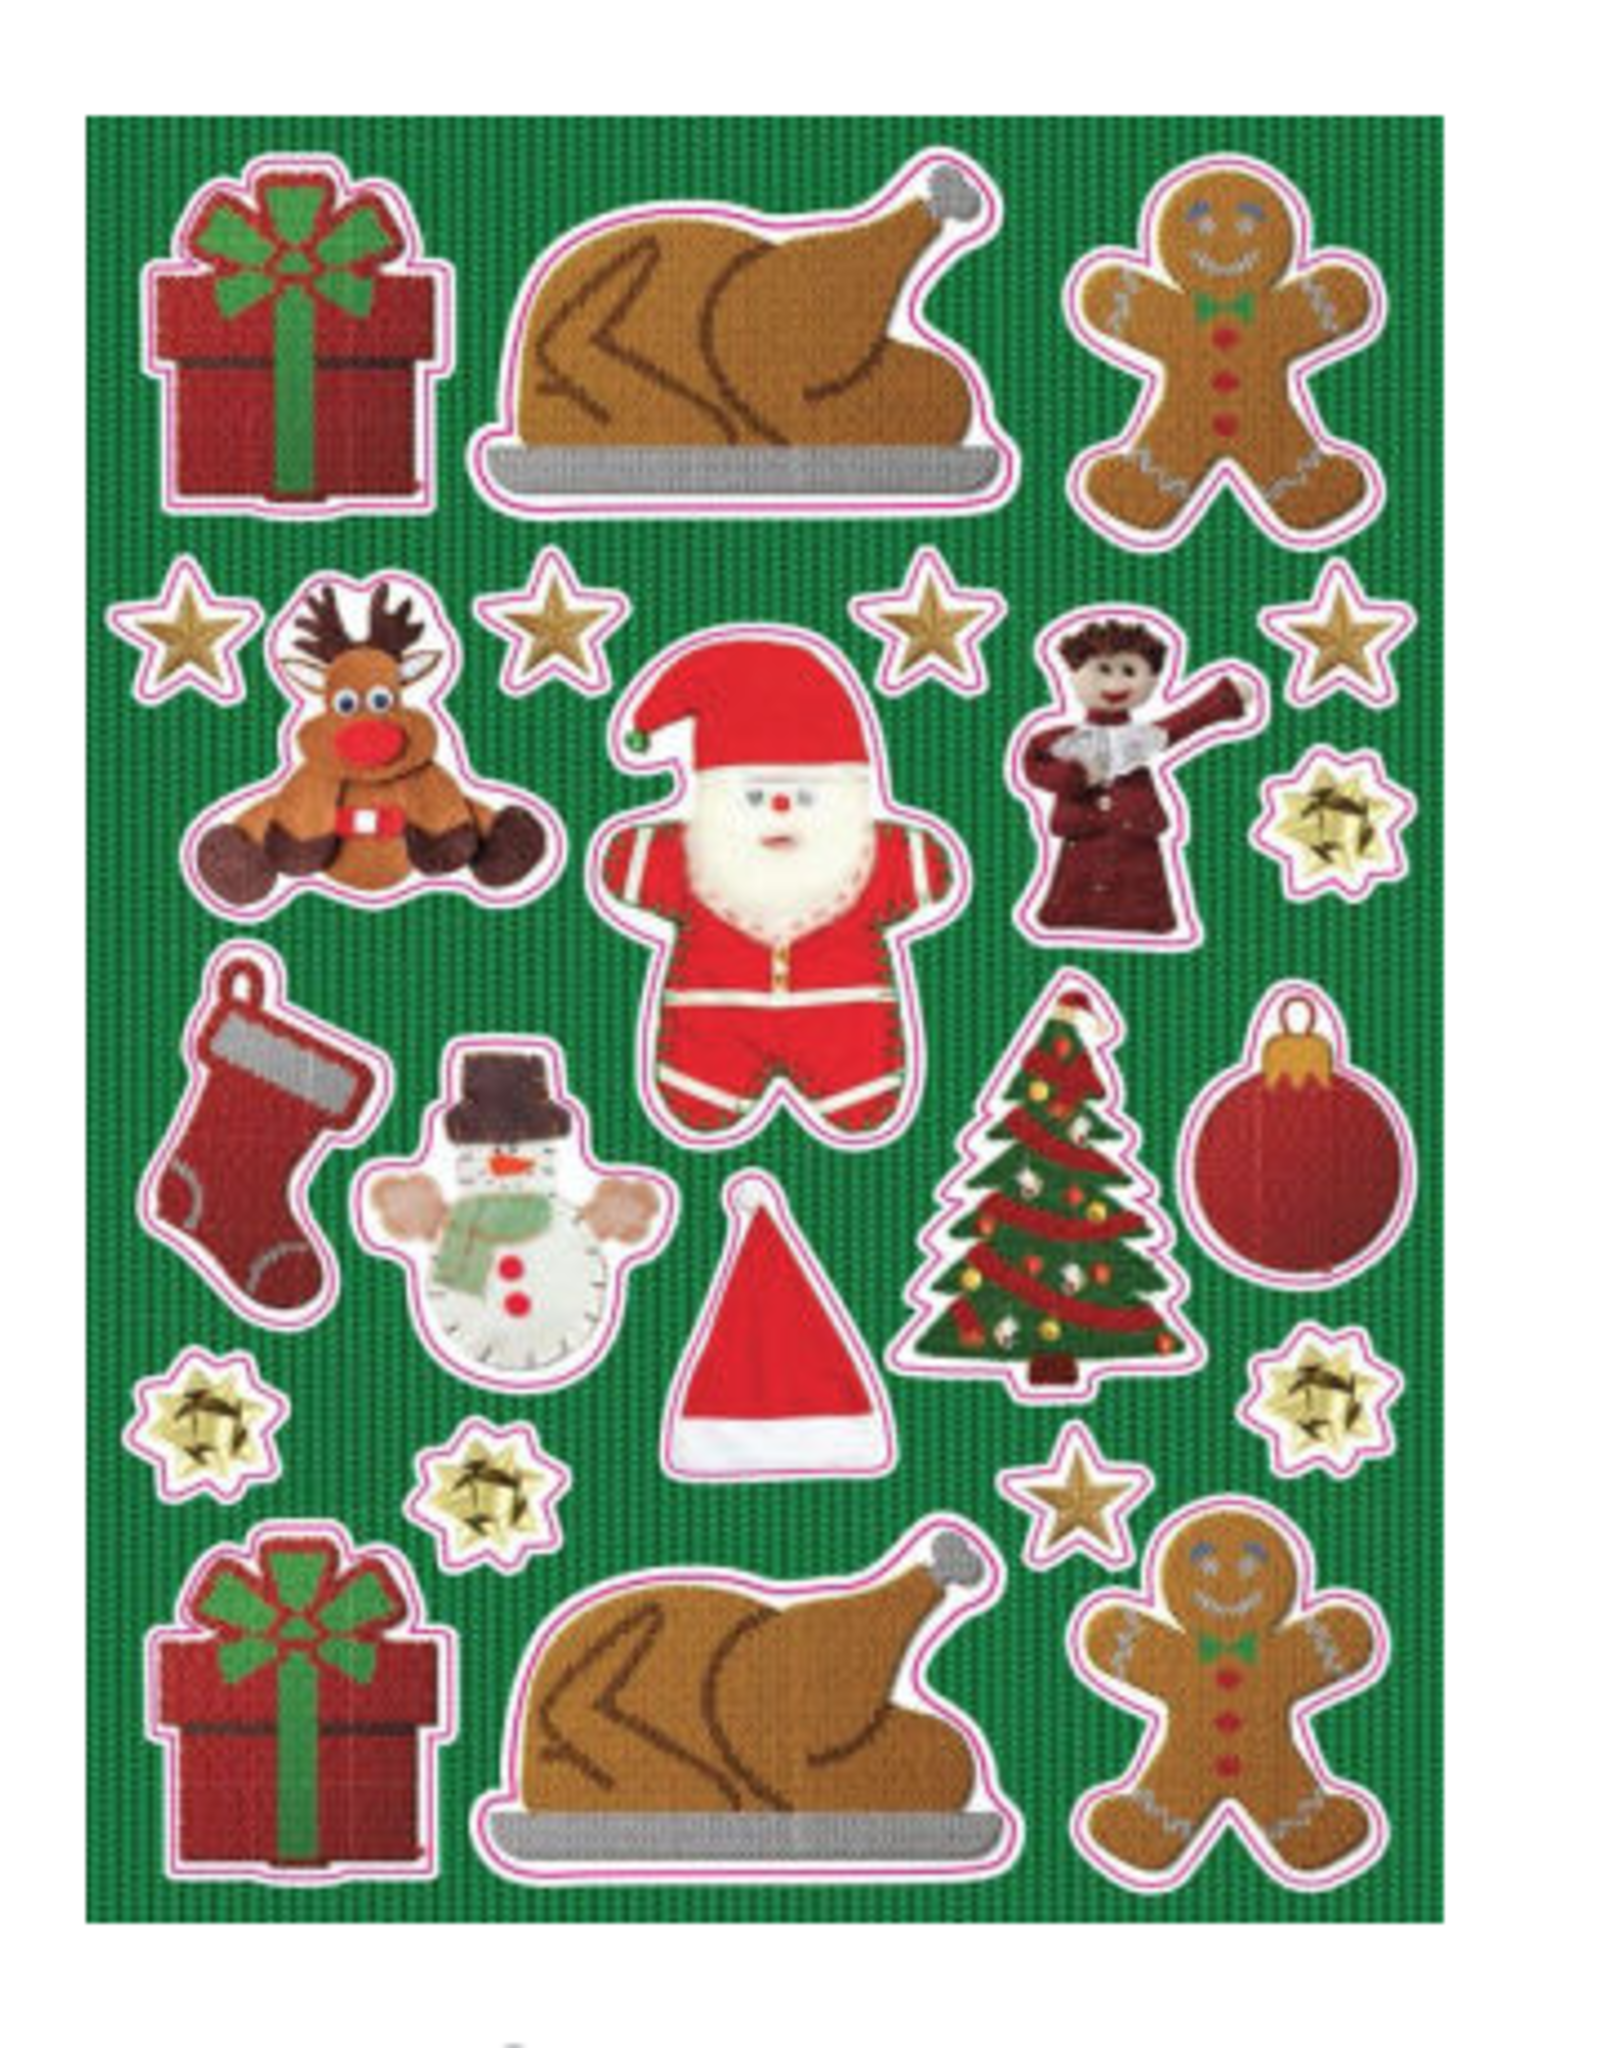 Tacky Christmas Sweater Notecards, 12 Notecards & Envelopes